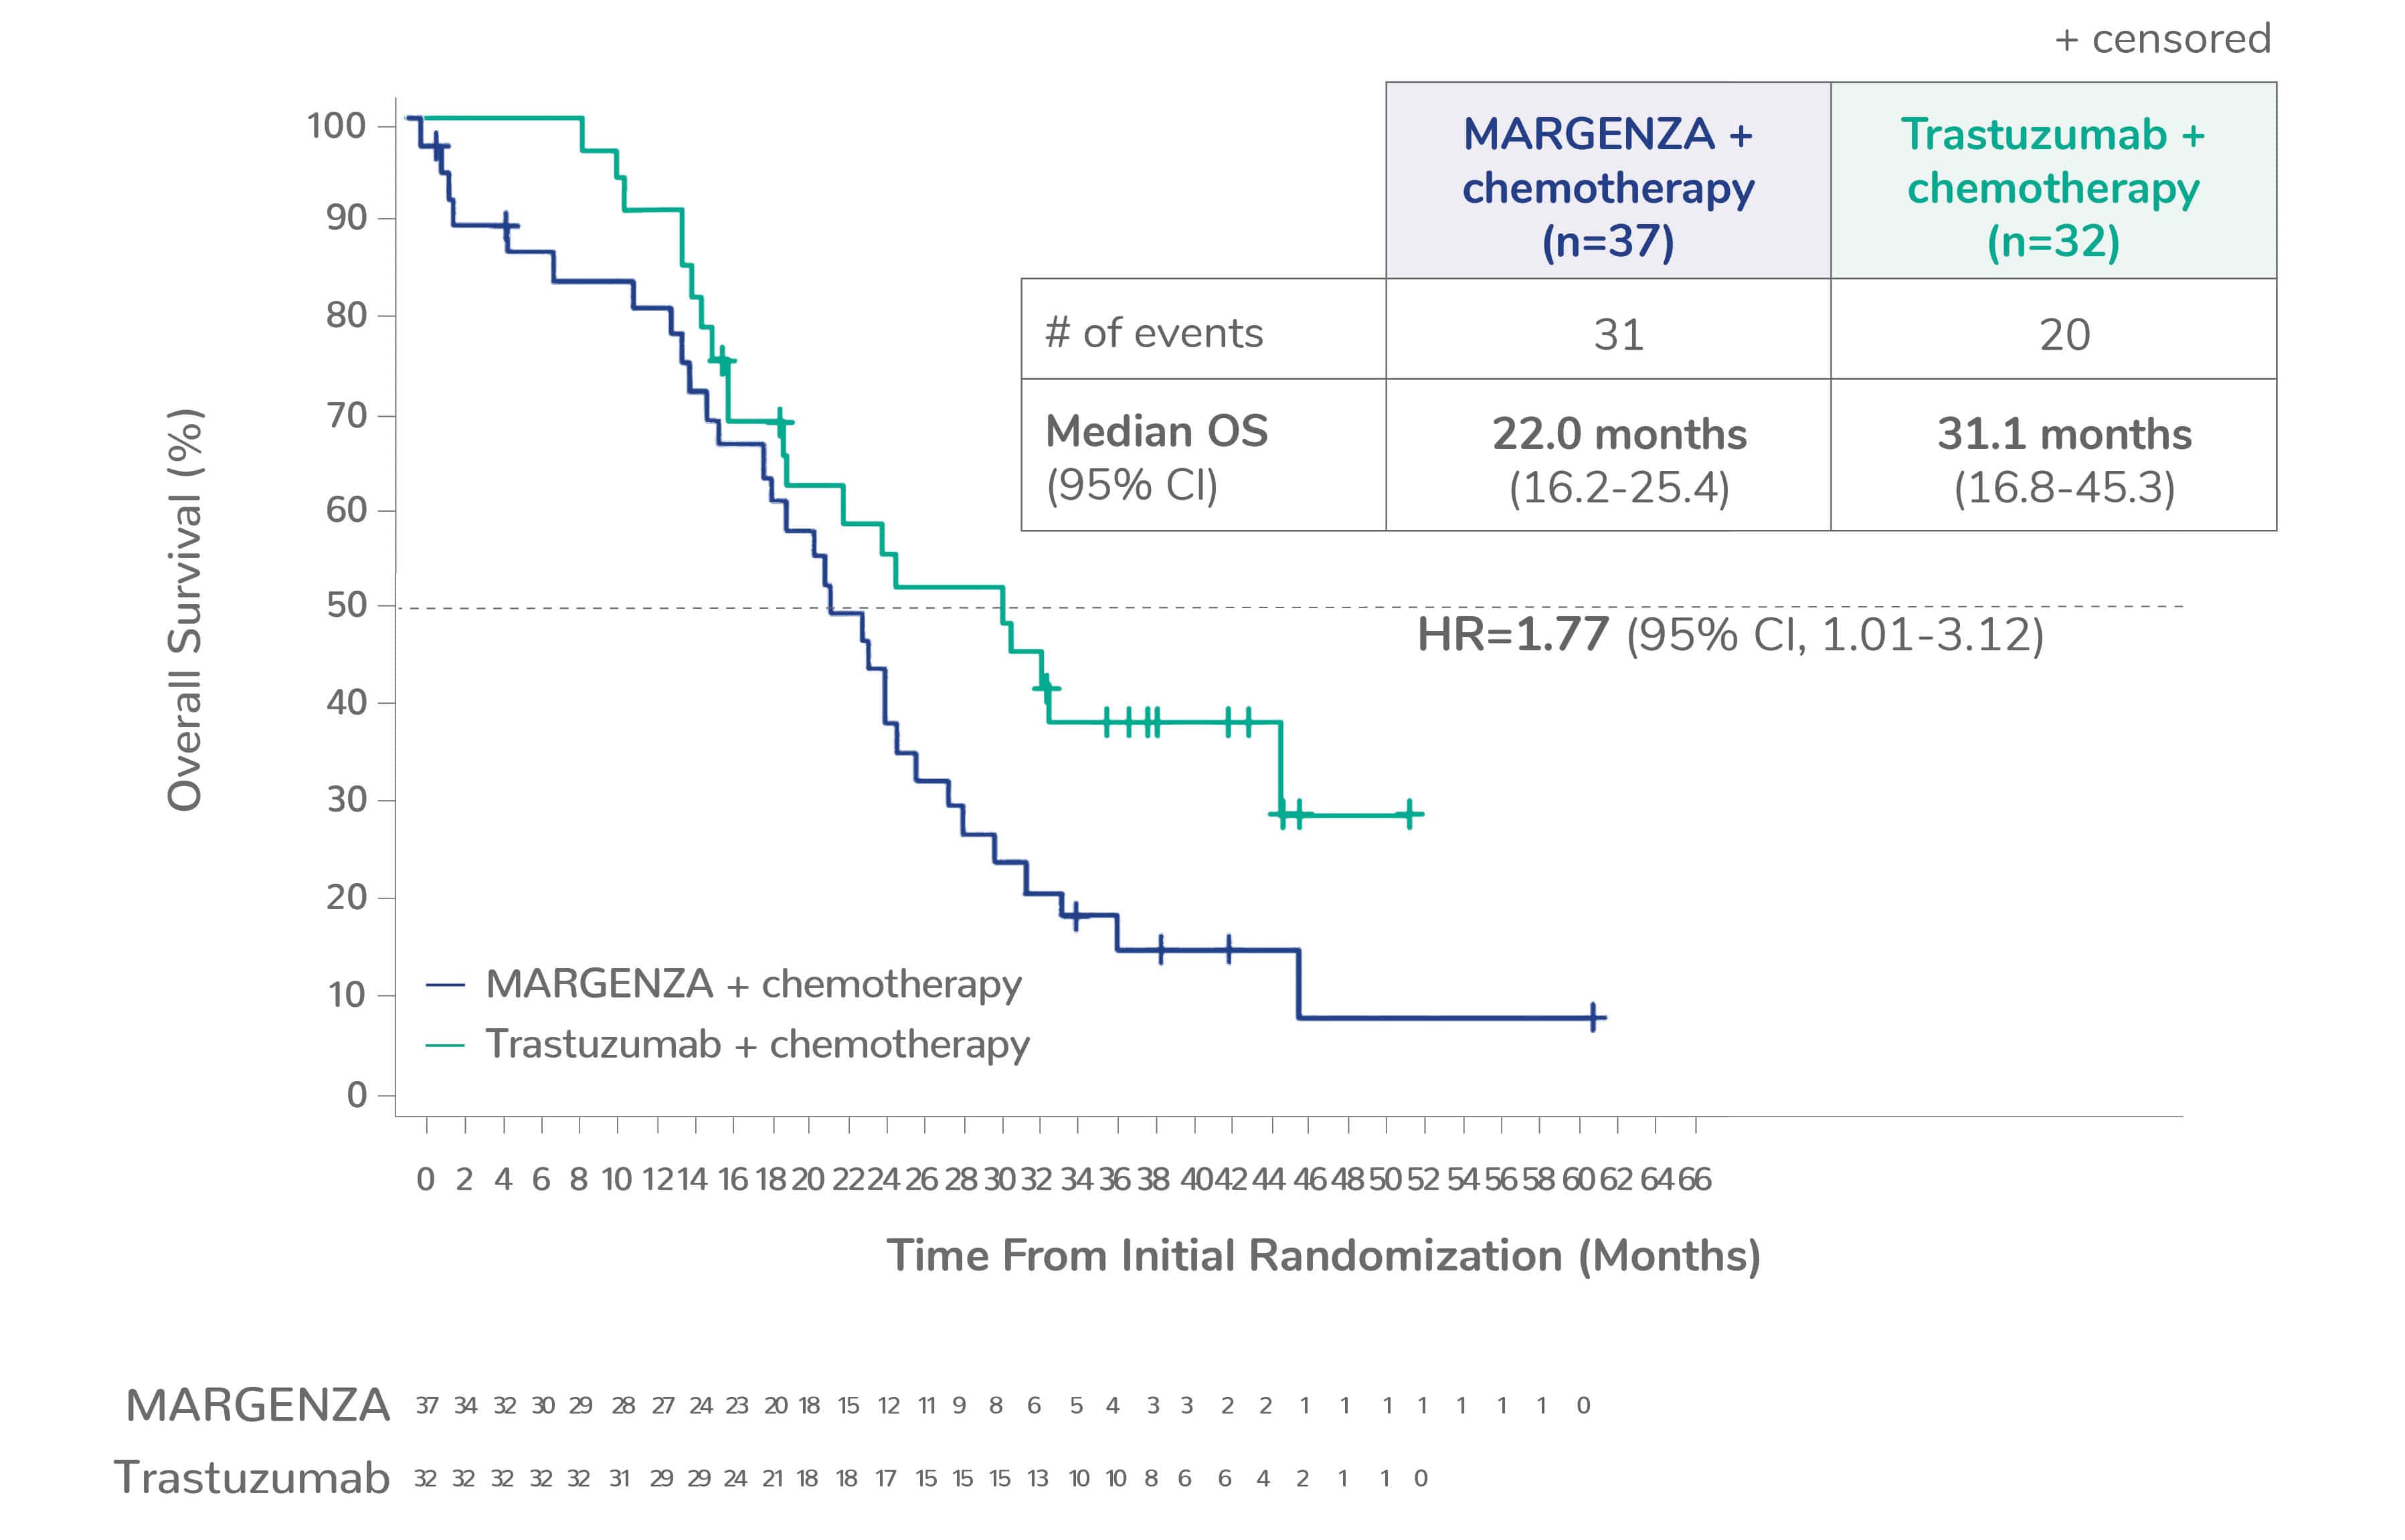 Kaplan Meyer curve showing median overall survival for CD16A VV genotype of 22.0 months for MARGENZA plus chemotherapy in 37 patients compared to 31.1 months for trastuzumab plus chemotherapy in 32 patients. The hazard ratio was 1.77.